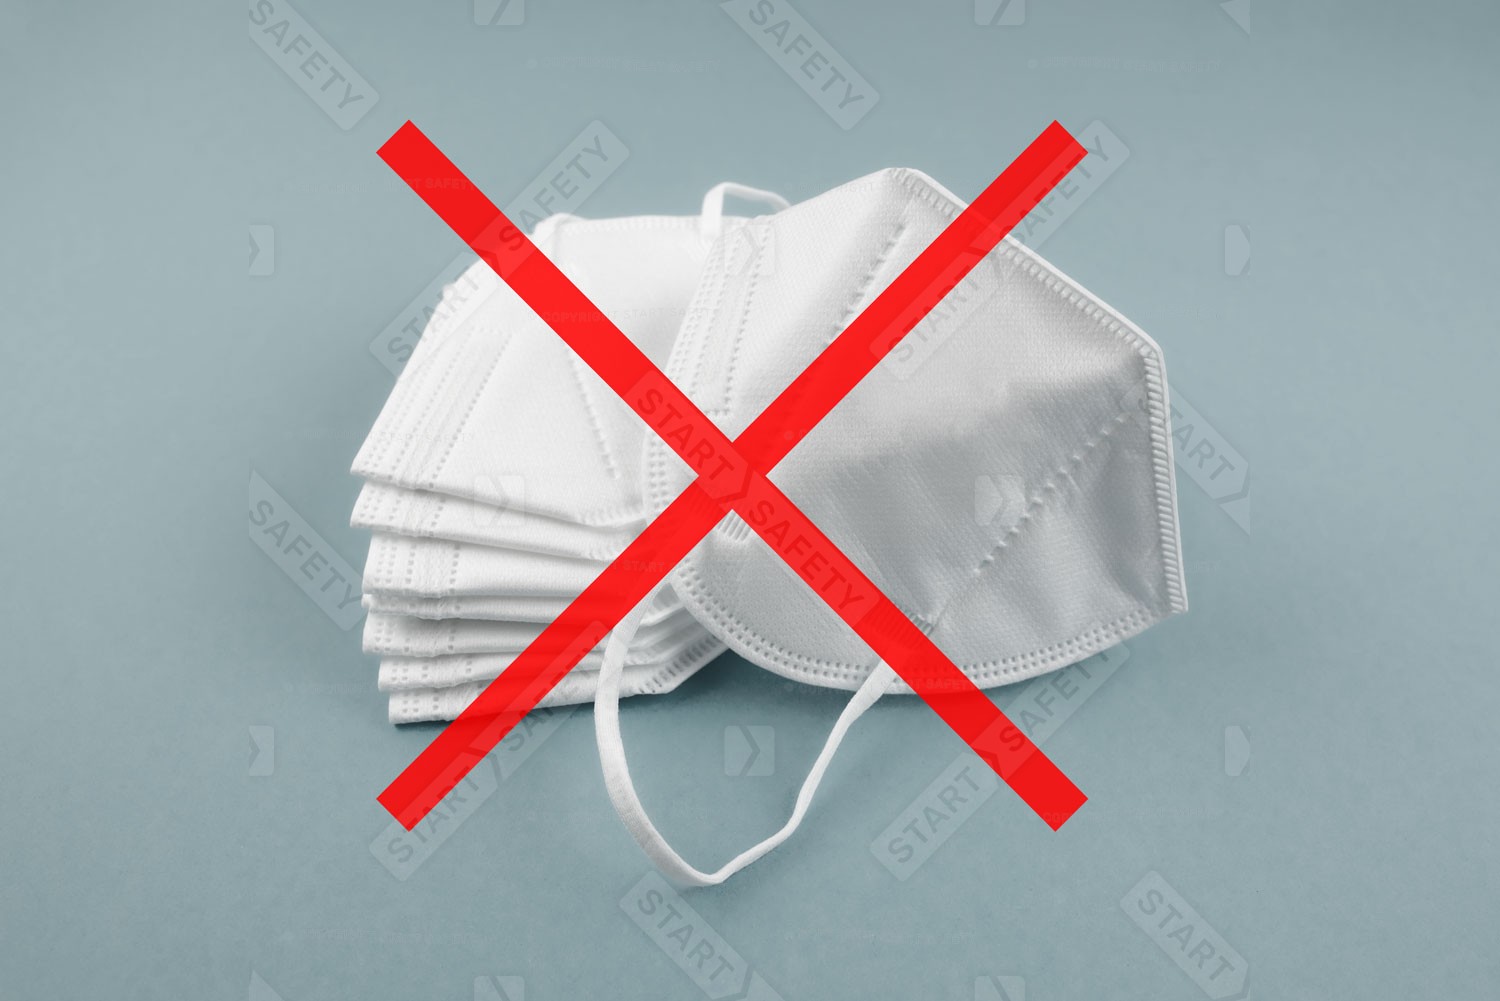 N95 Masks Are Not Suitable For Use In The UK